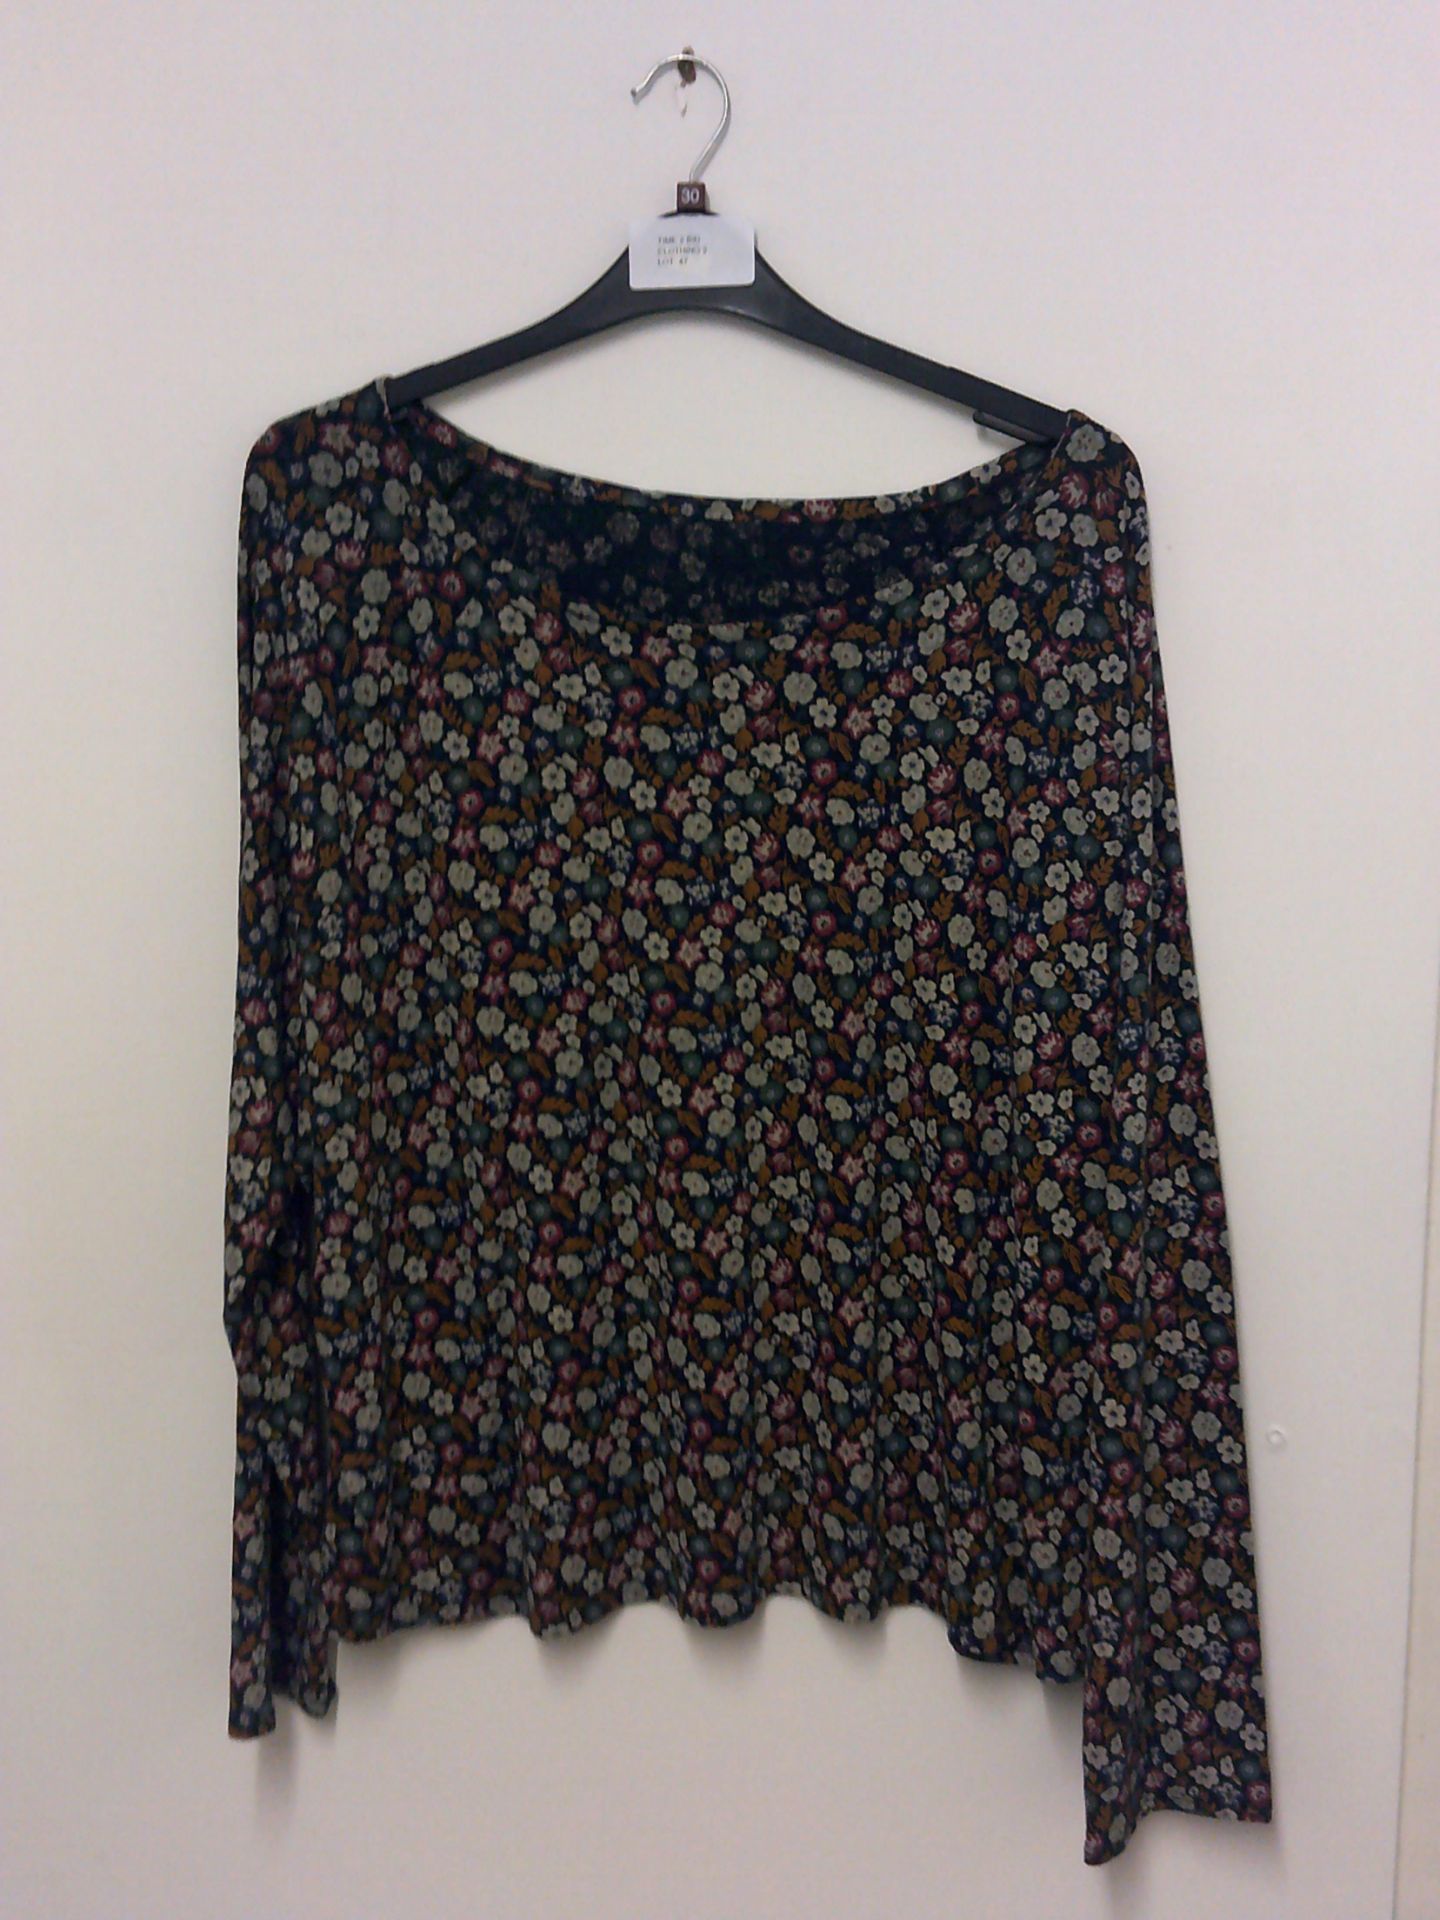 FLORAL LONG SLEEVED TOP SIZE 30